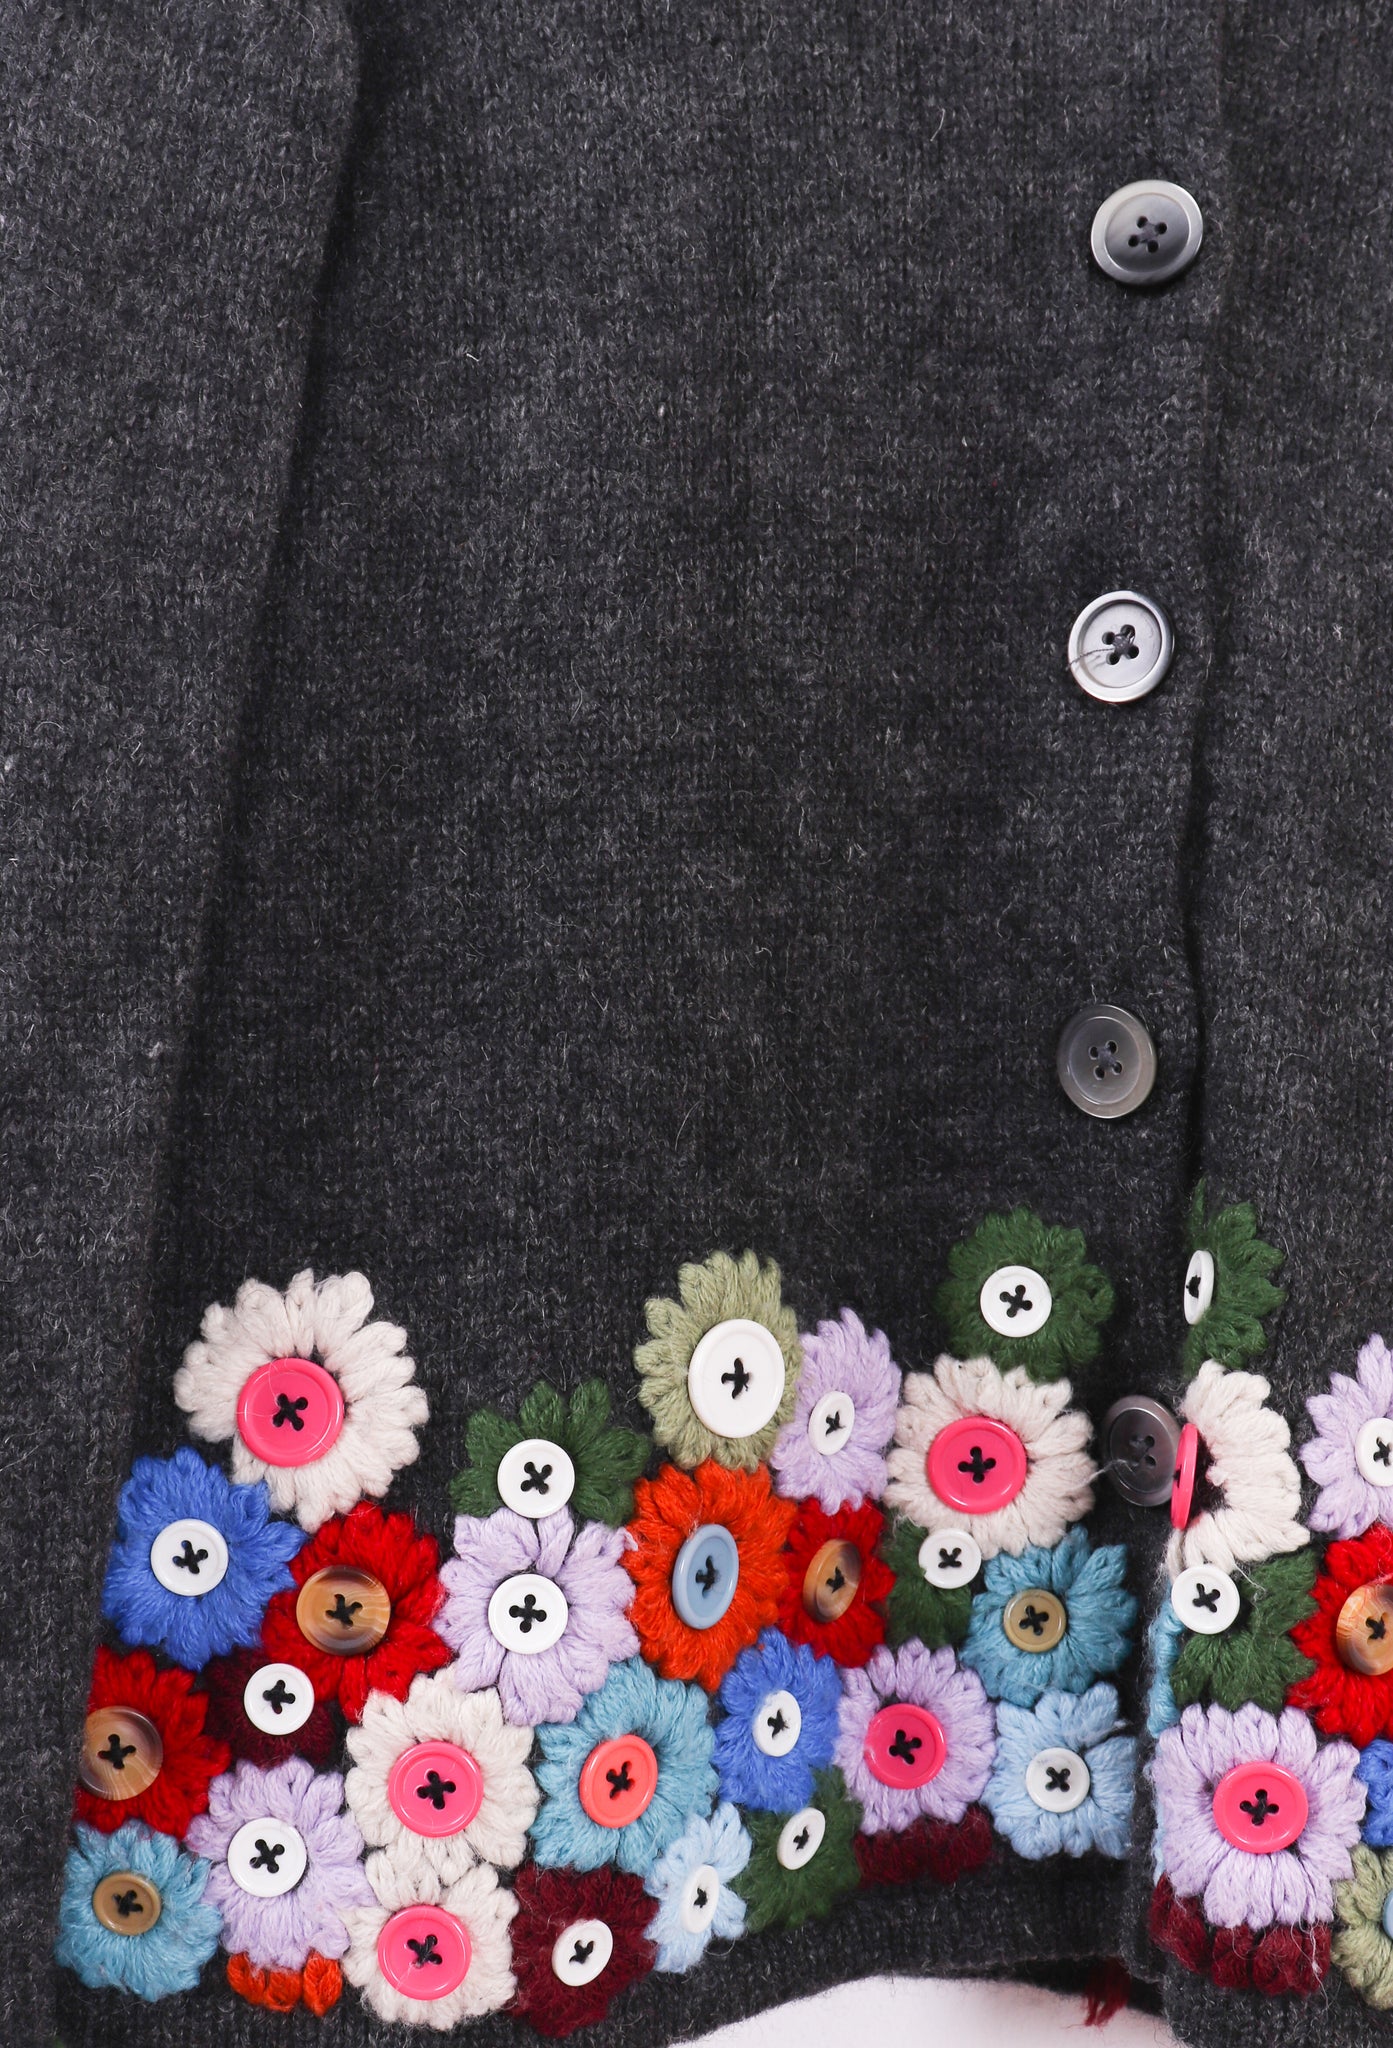 Stitched Button Flowers Sweater Cardigan